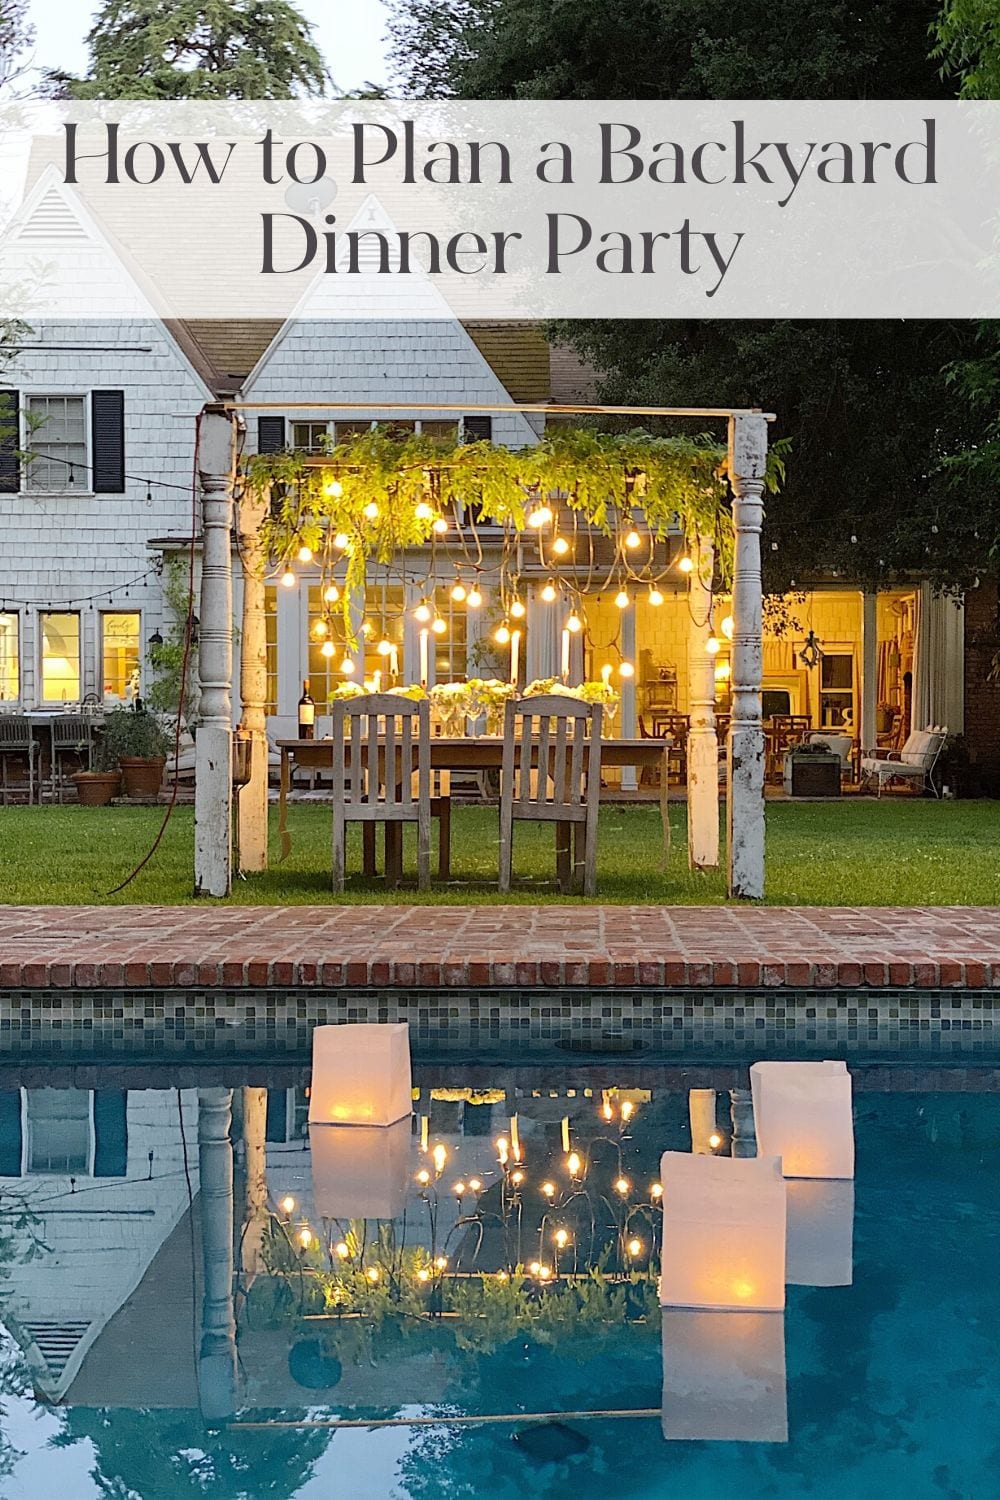 I love to plan parties. I created this backyard dinner party for my family. Everything ... the location, lighting, and flowers were amazing.